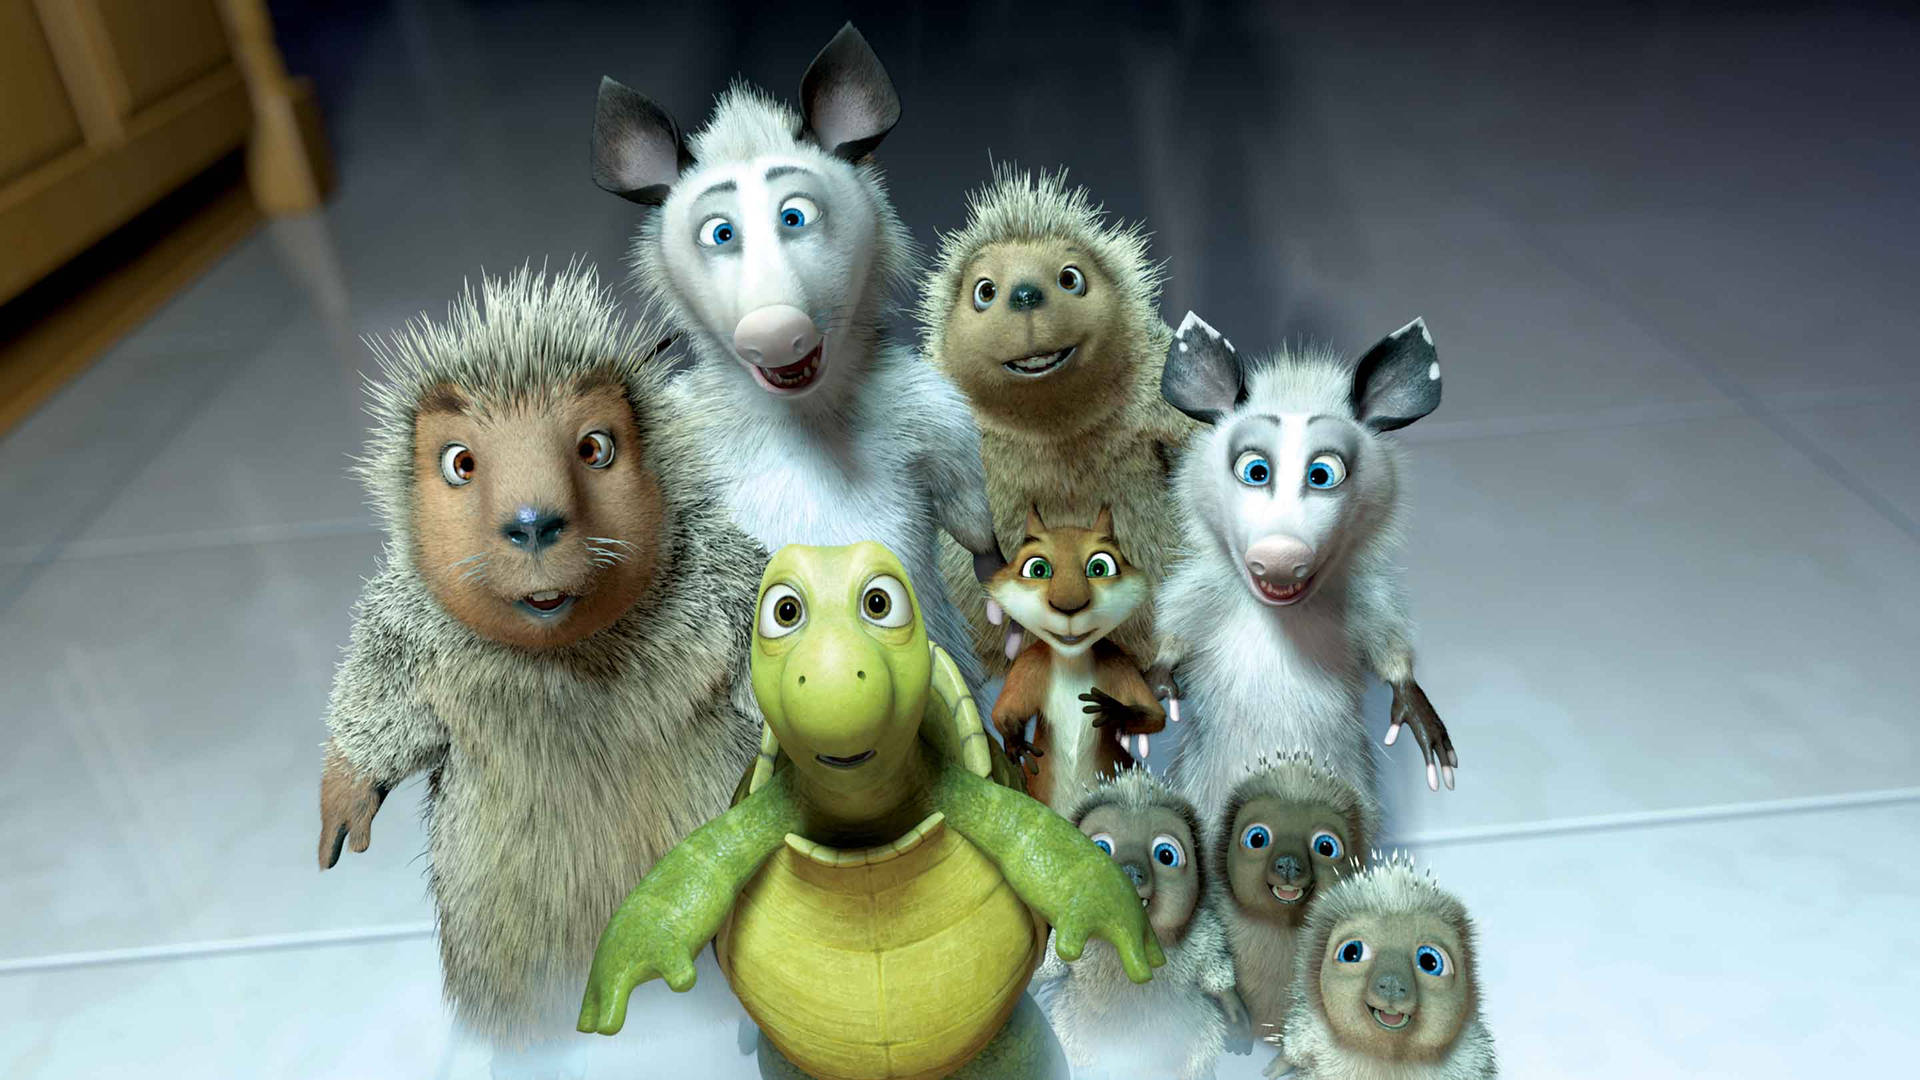 Over The Hedge characters gazing in wonder Wallpaper